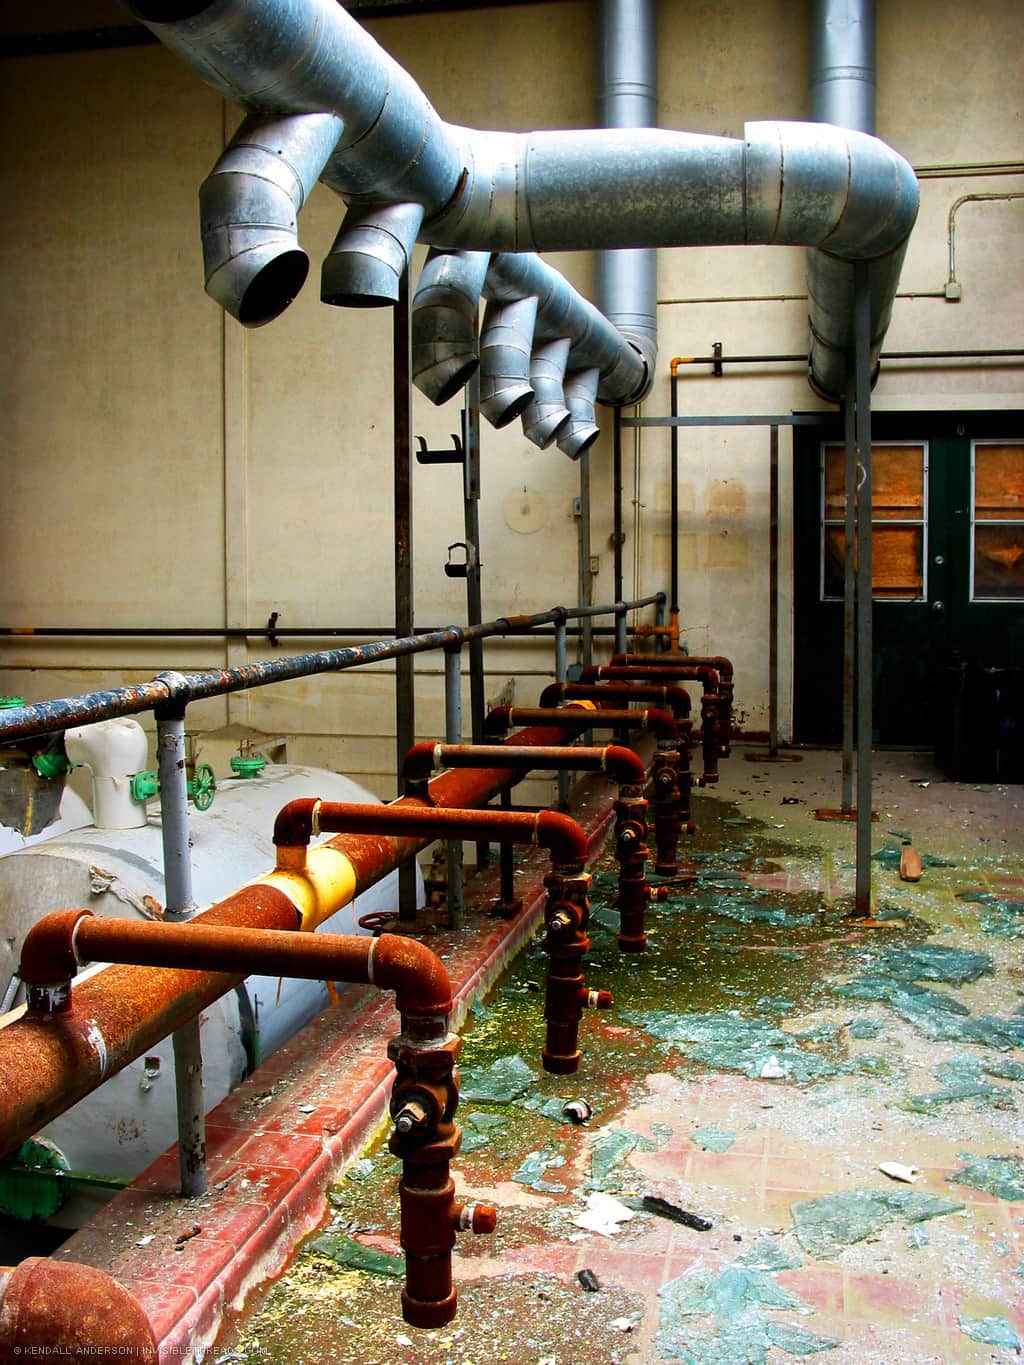 An array of silver metal air ducts is positioned about an array of red pipes. The floor is covered in debris.